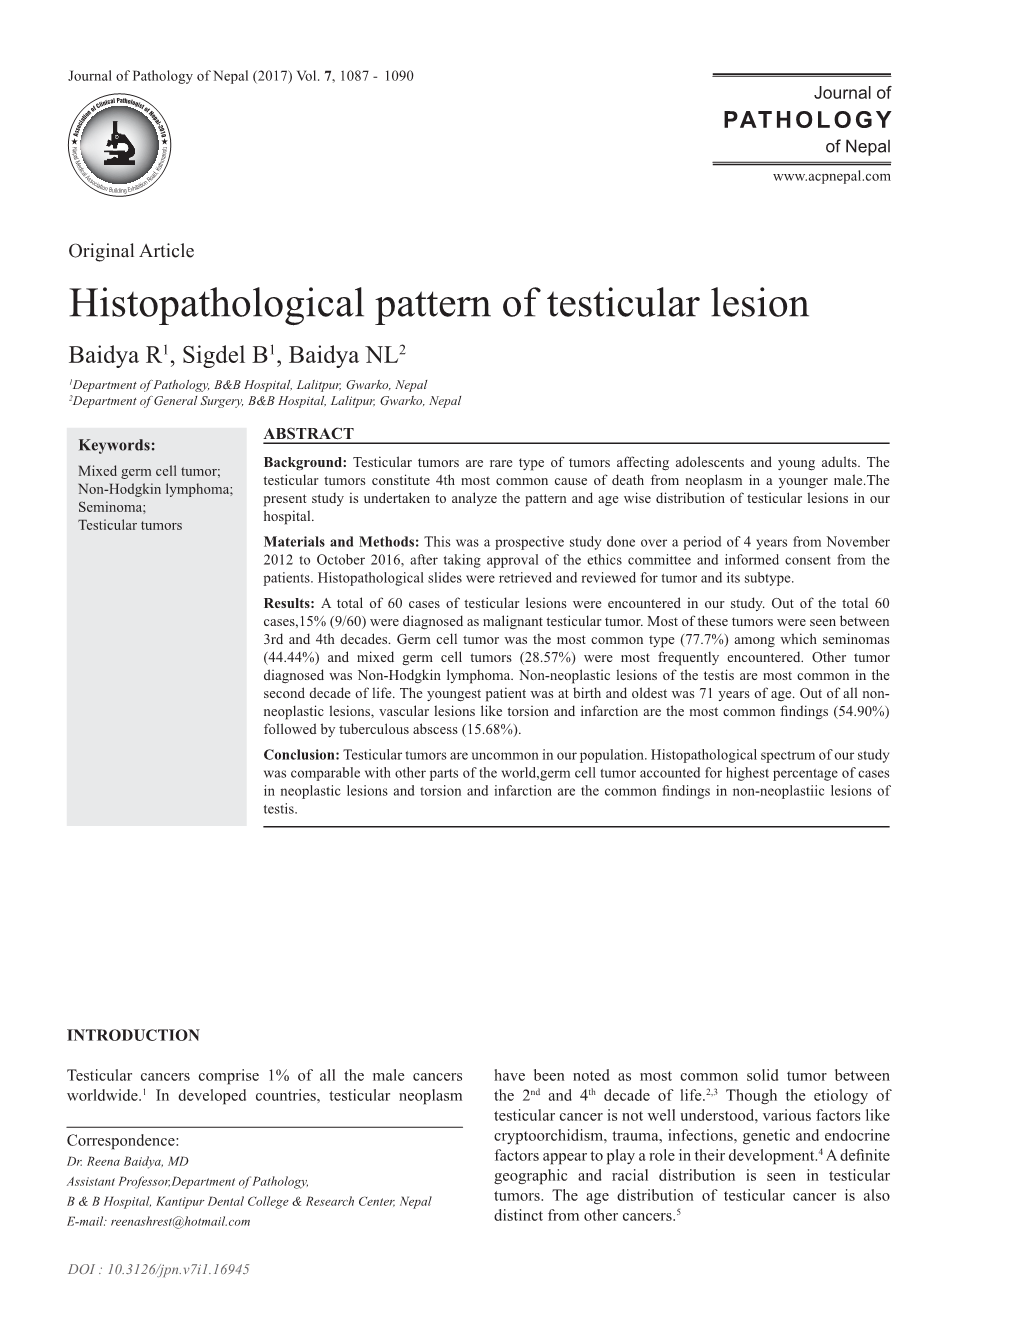 Histopathological Pattern of Testicular Lesion